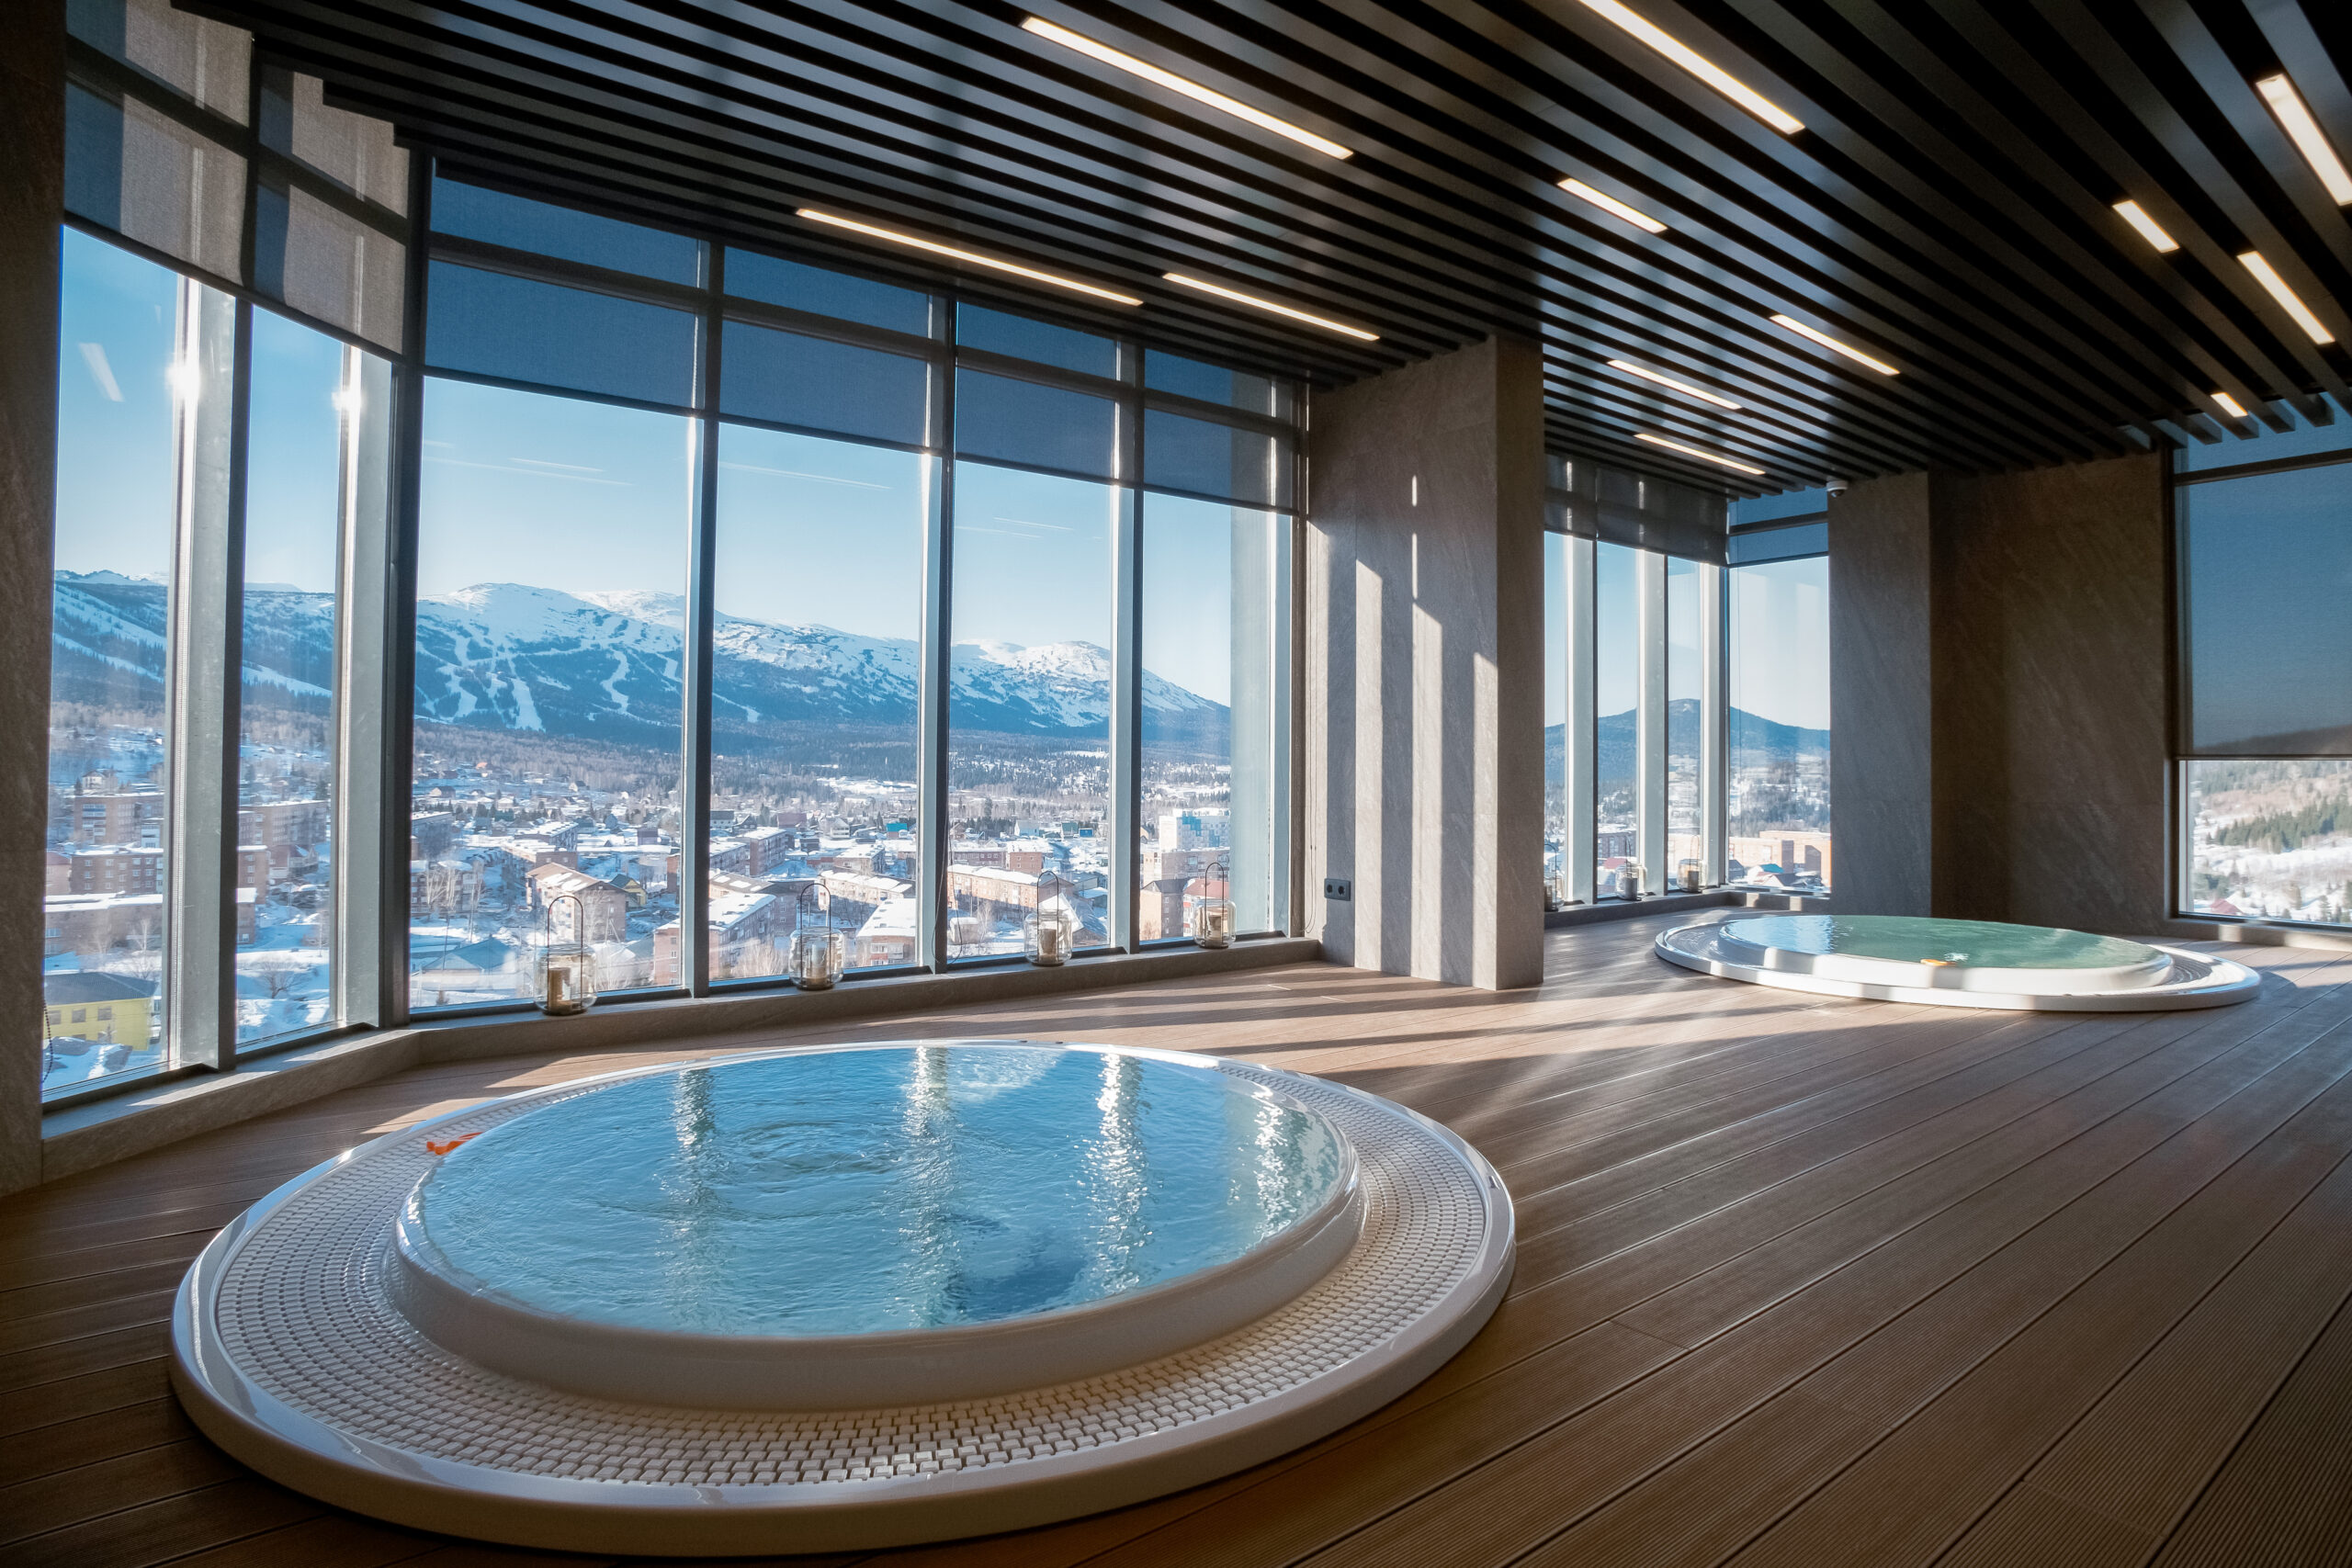 Main requirements for the design and interiors of SPA & Wellness